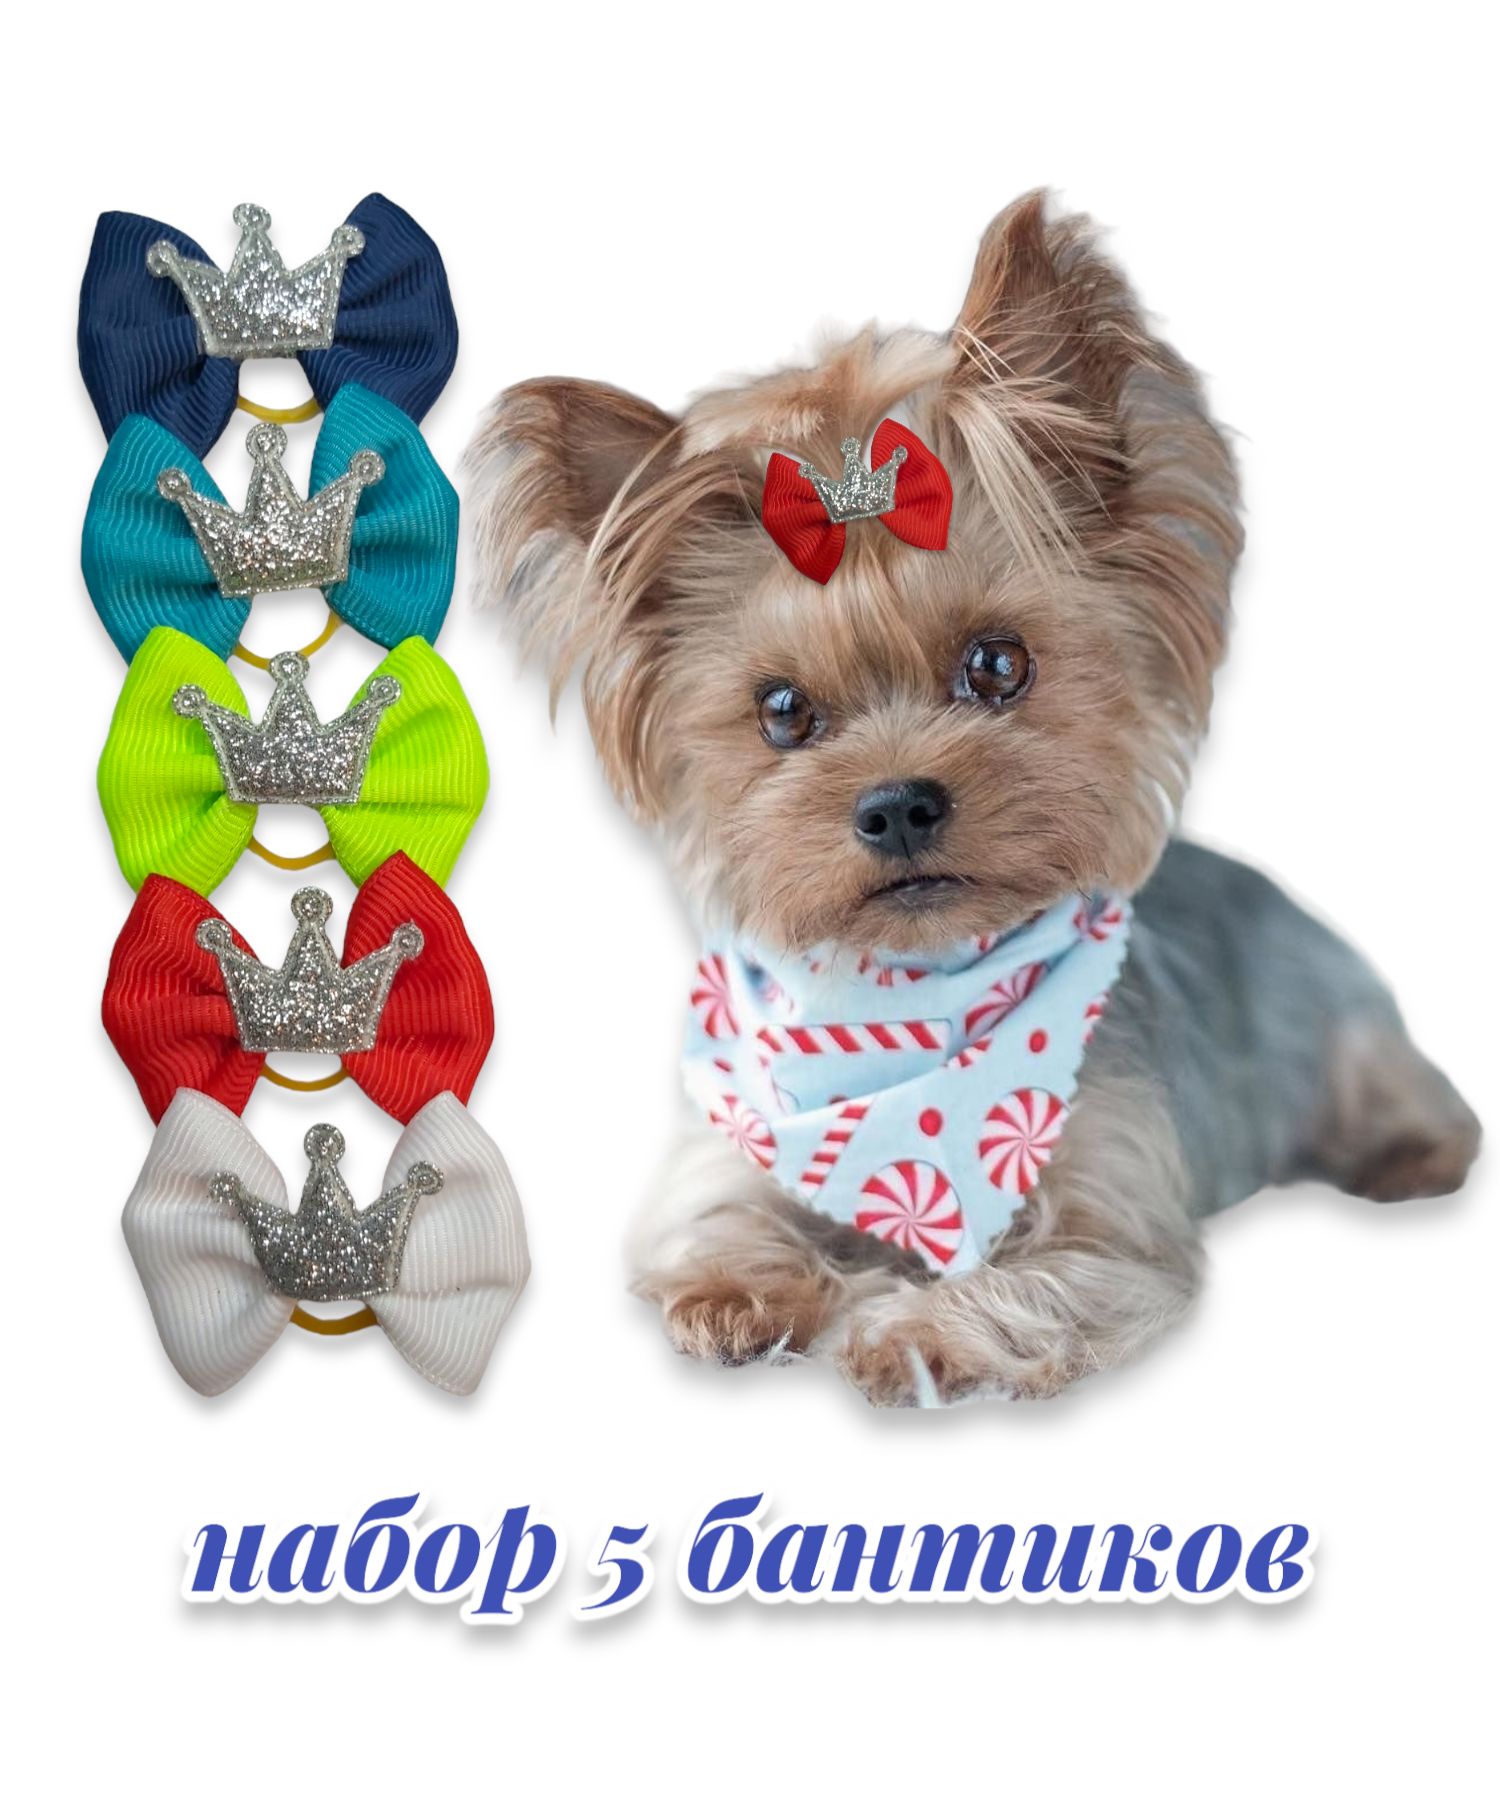 Show bows for dogs, show bows for yorkshire terriers, Show bows for dogs with cr